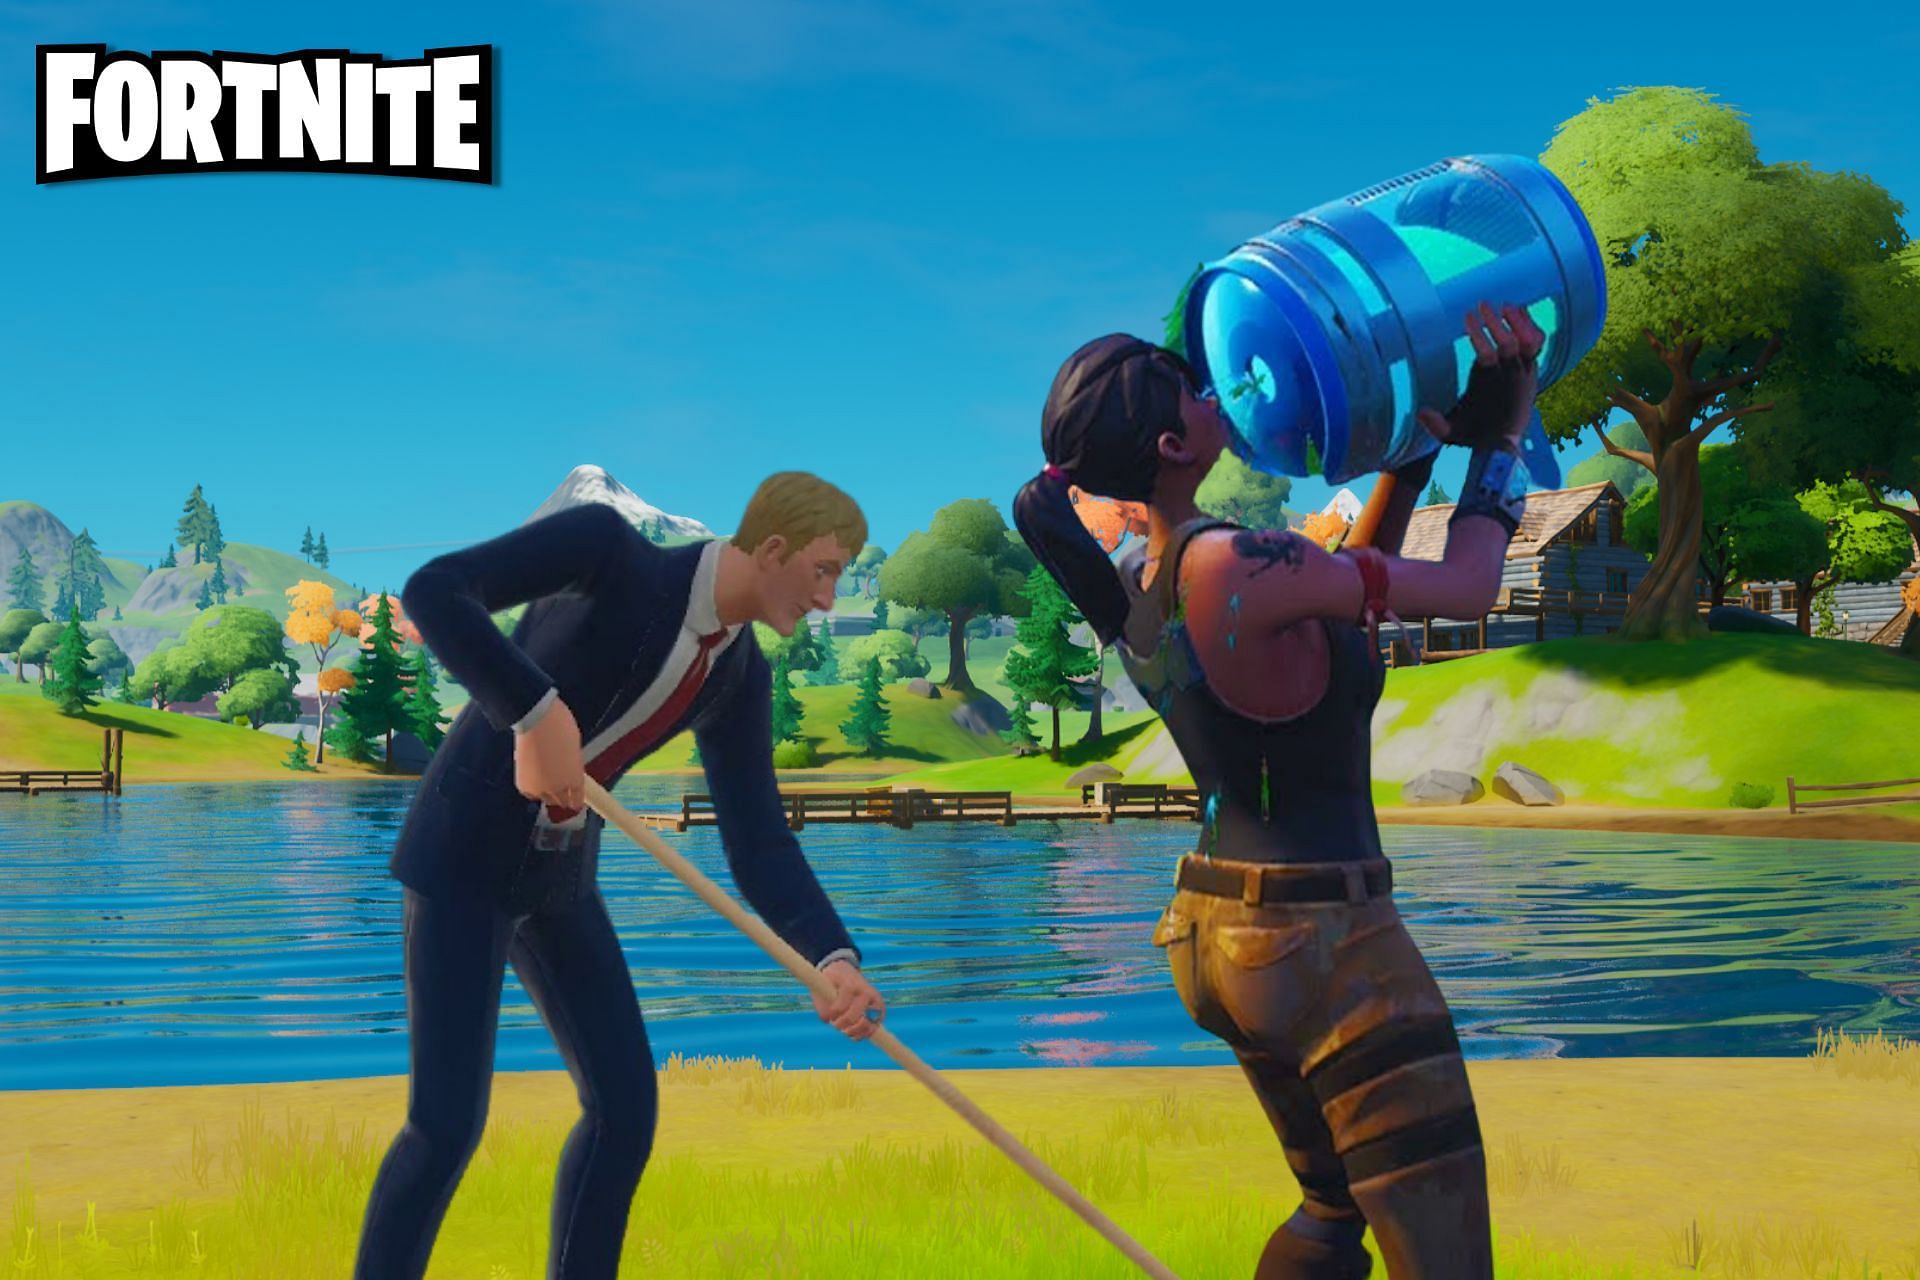 famous-fortnite-chug-jug-with-you-song-gets-dmca-strikes